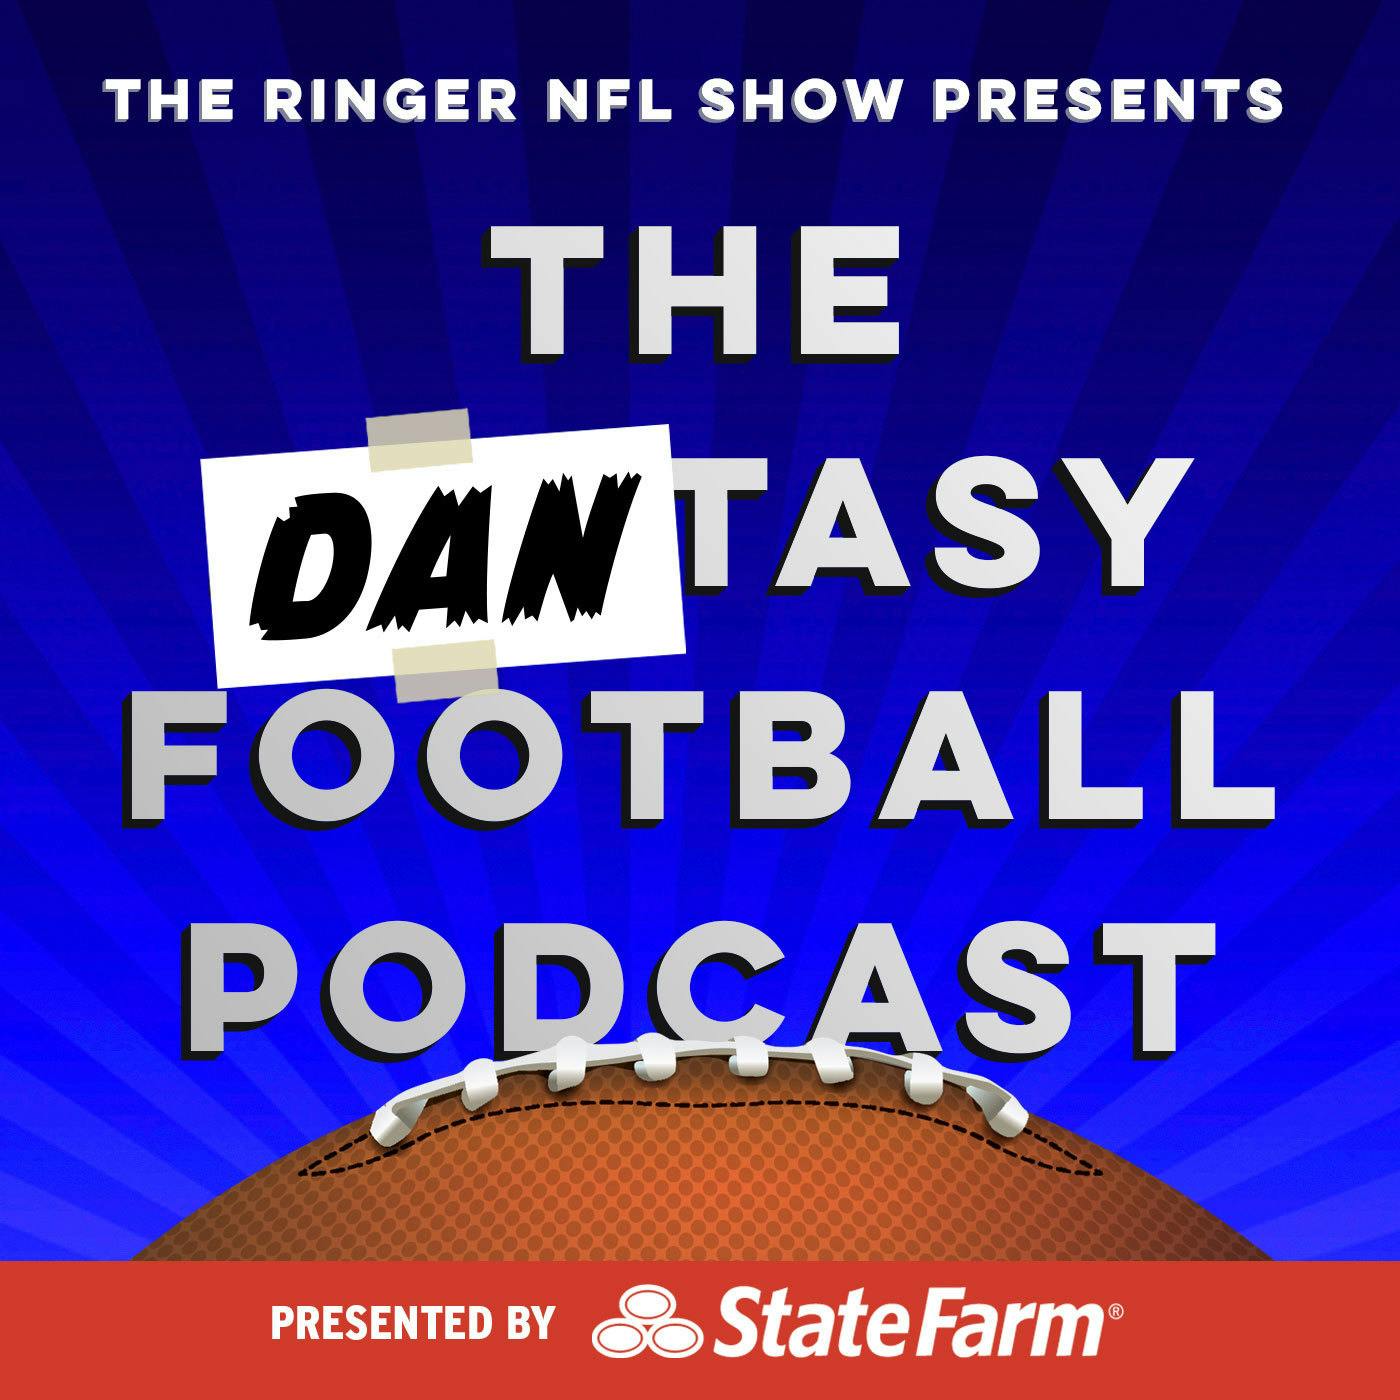 Remember the Titans | The Dantasy Football Podcast